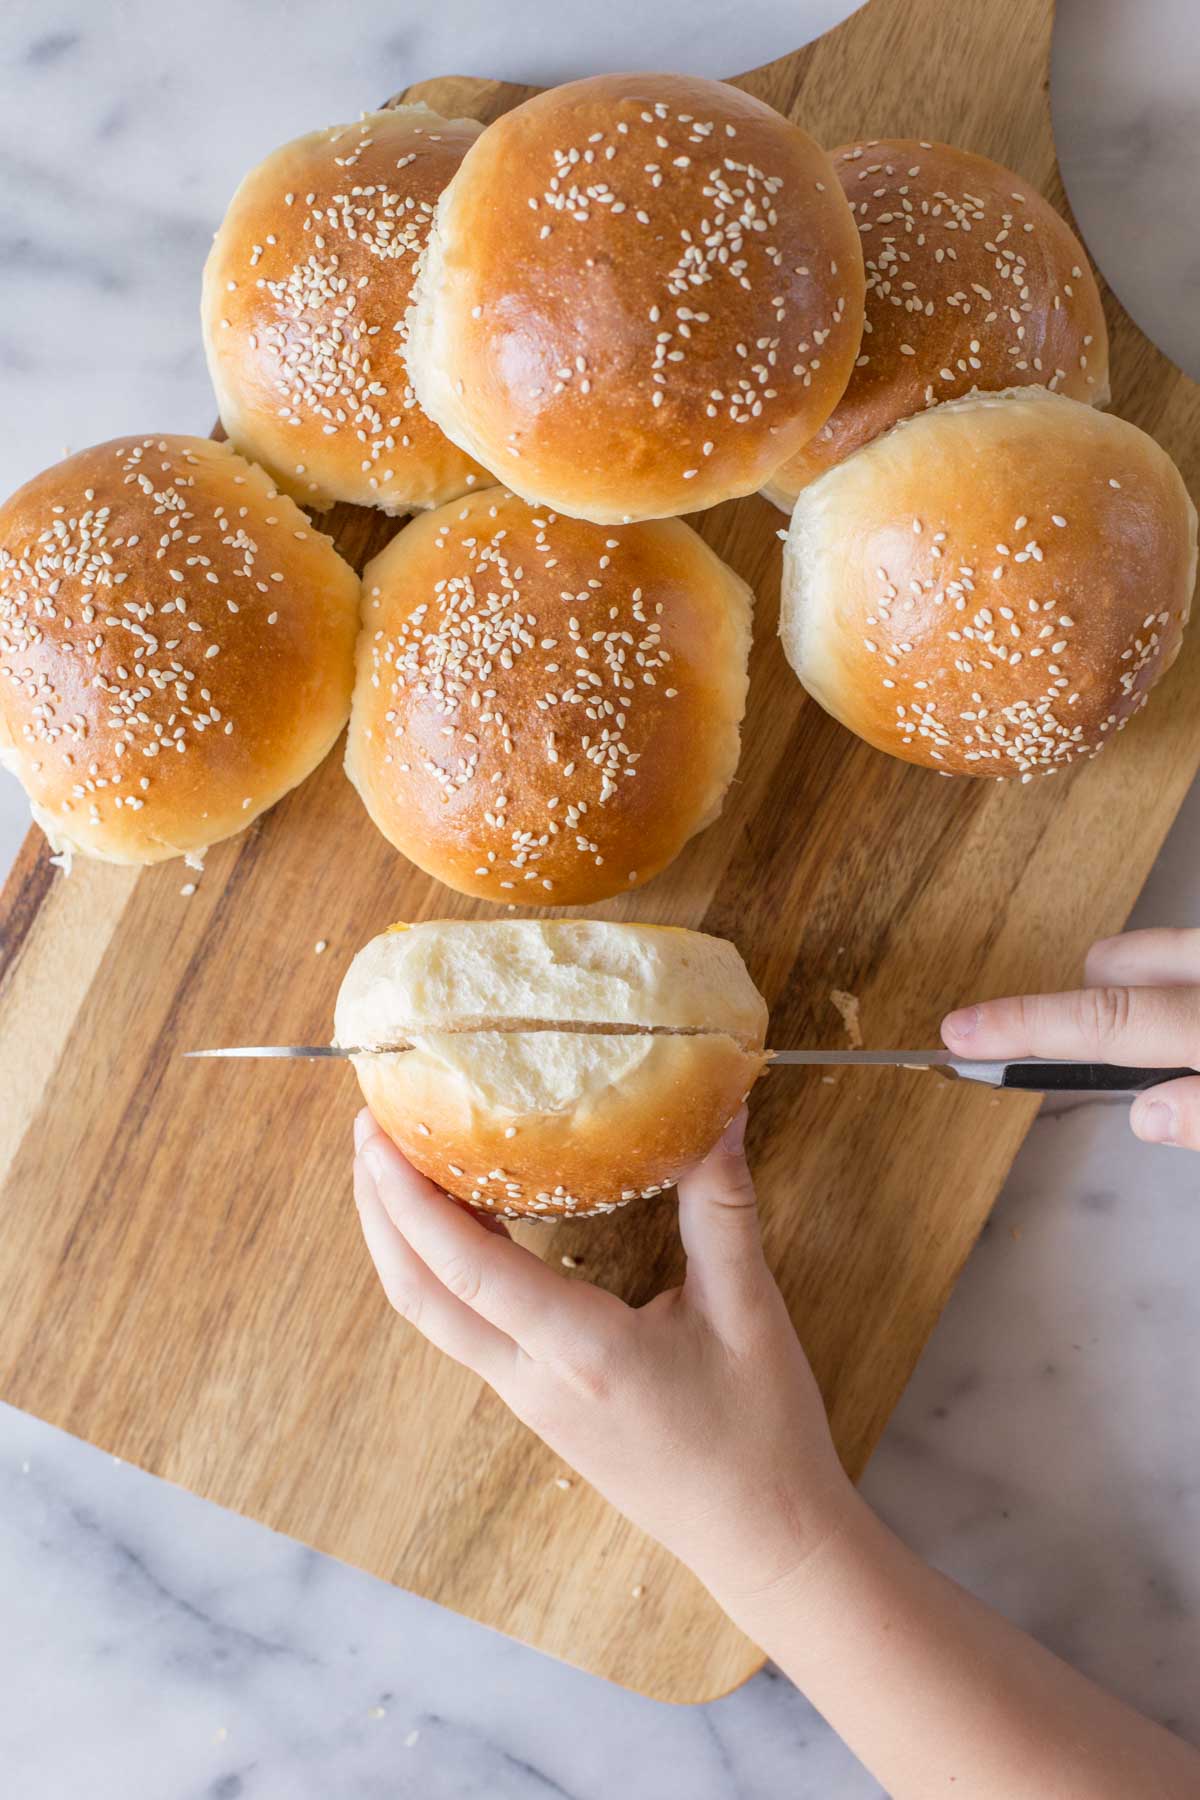 A Sourdough Hamburger Bun being cut open on a wooden cutting board with more buns next to it.  